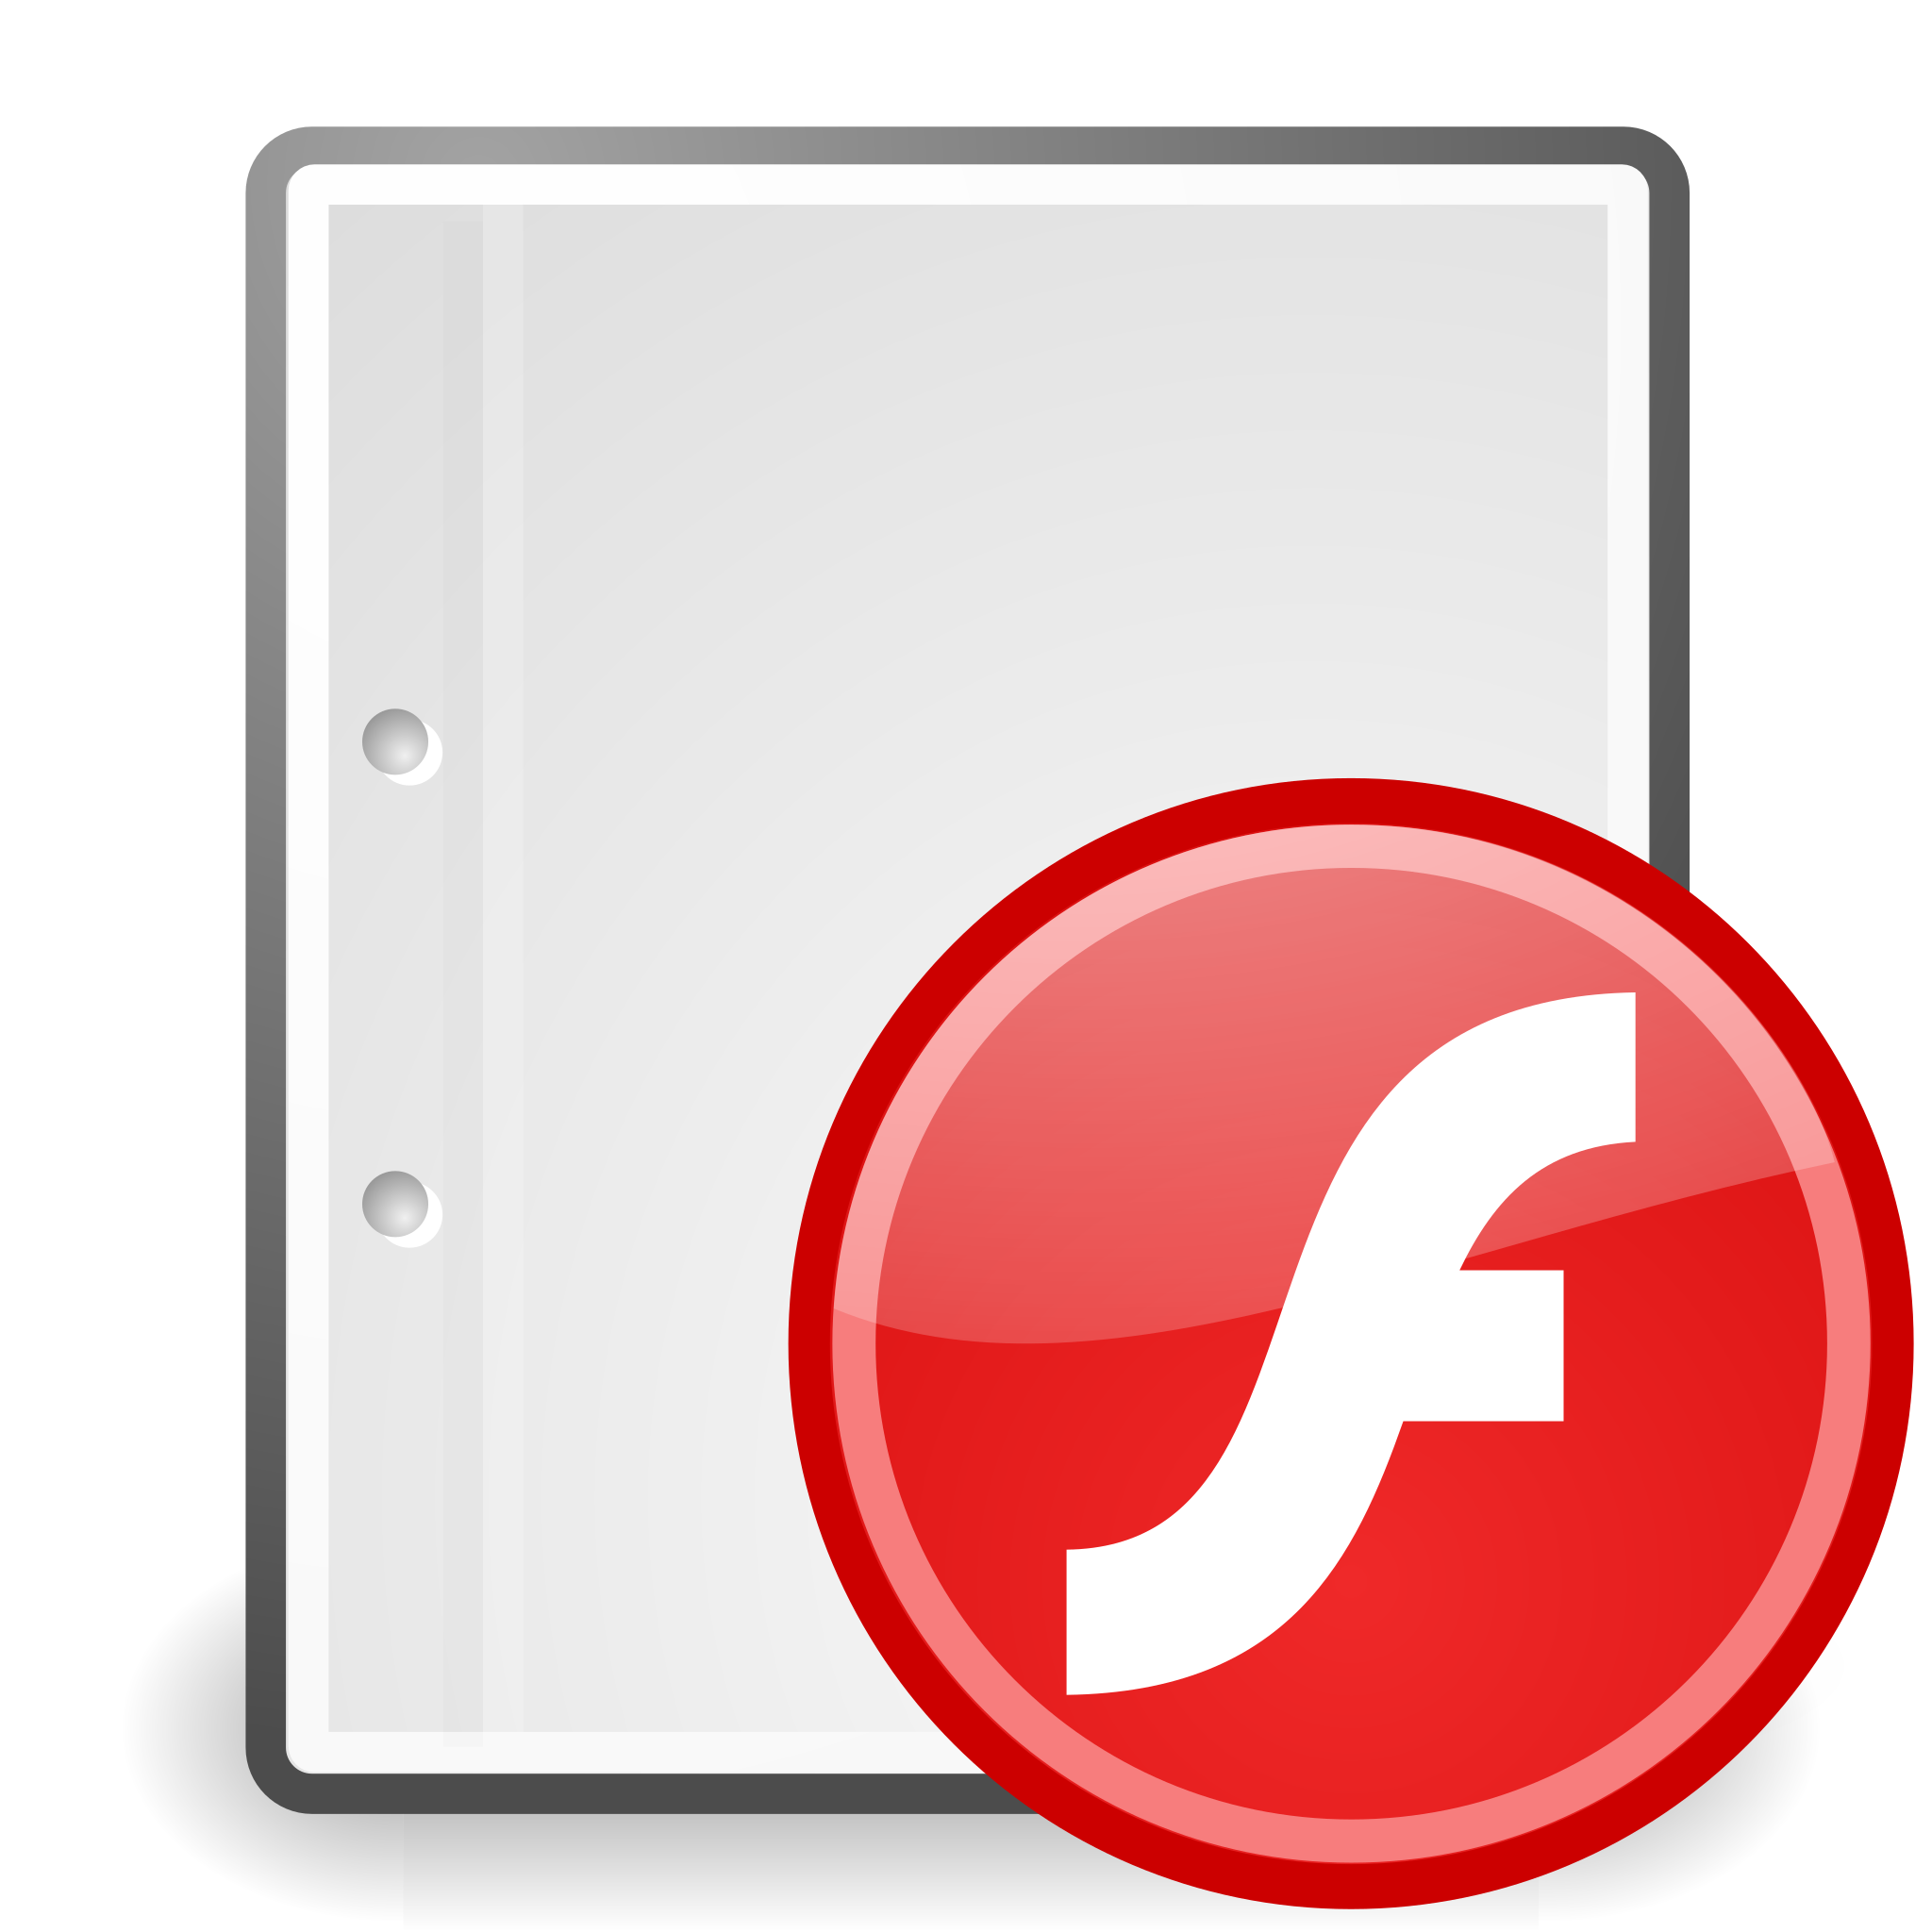 Flash icon with a red X